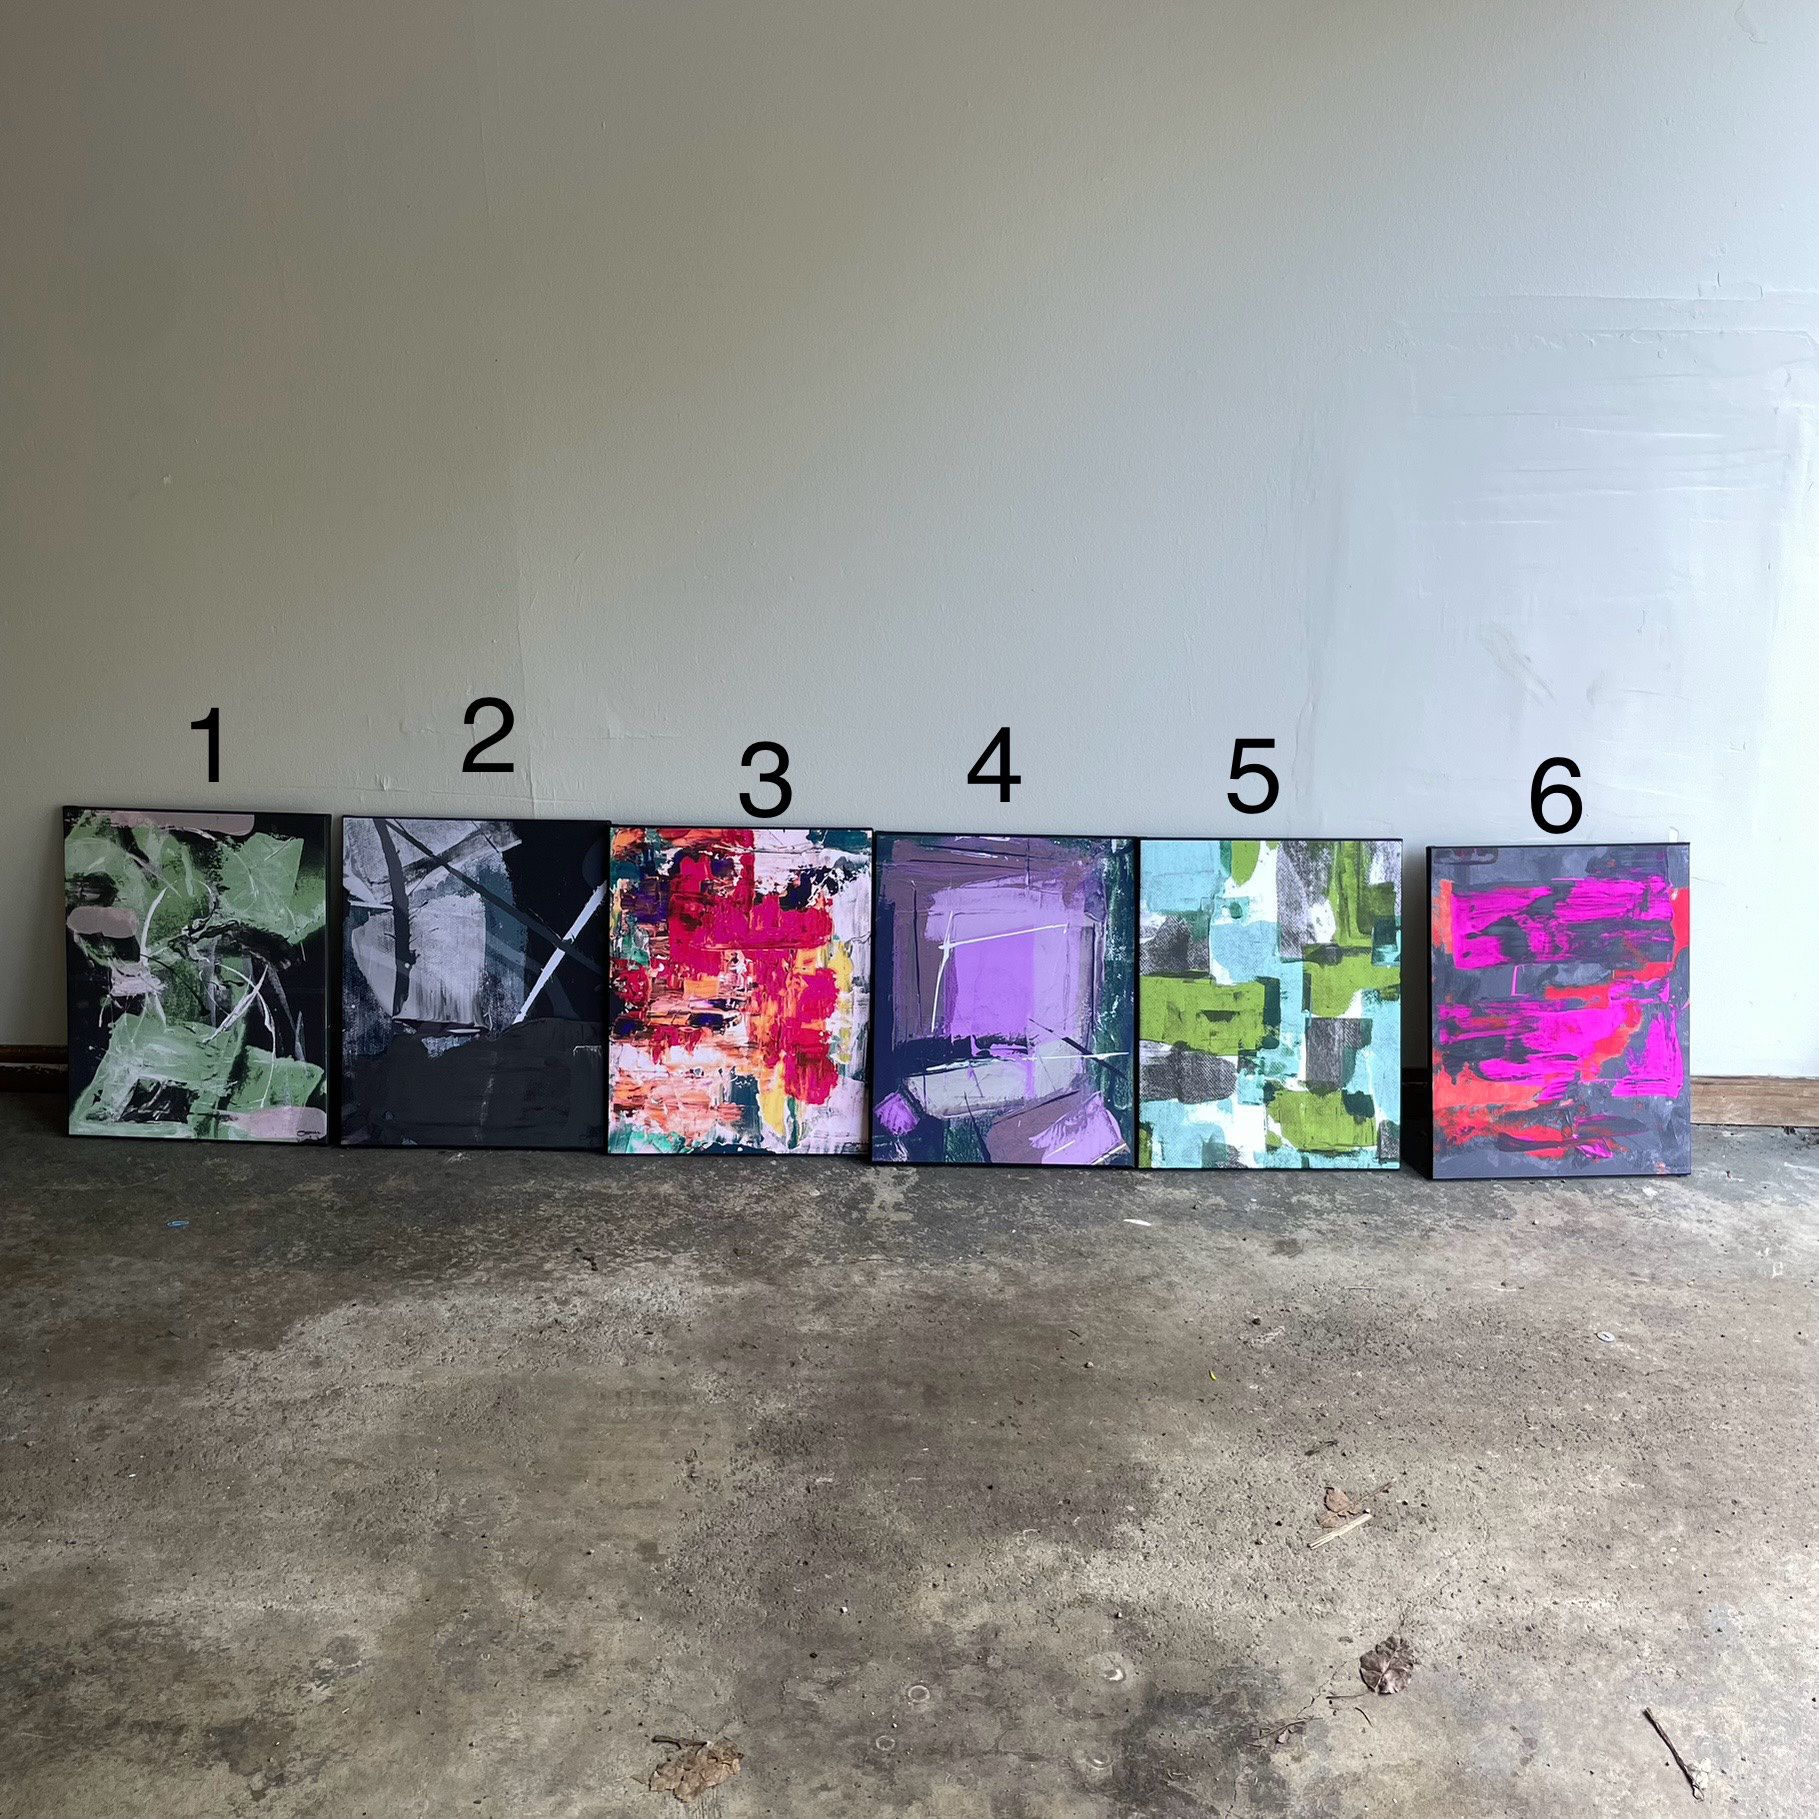 16x20in Abstract Art Prints On Canvas $18each